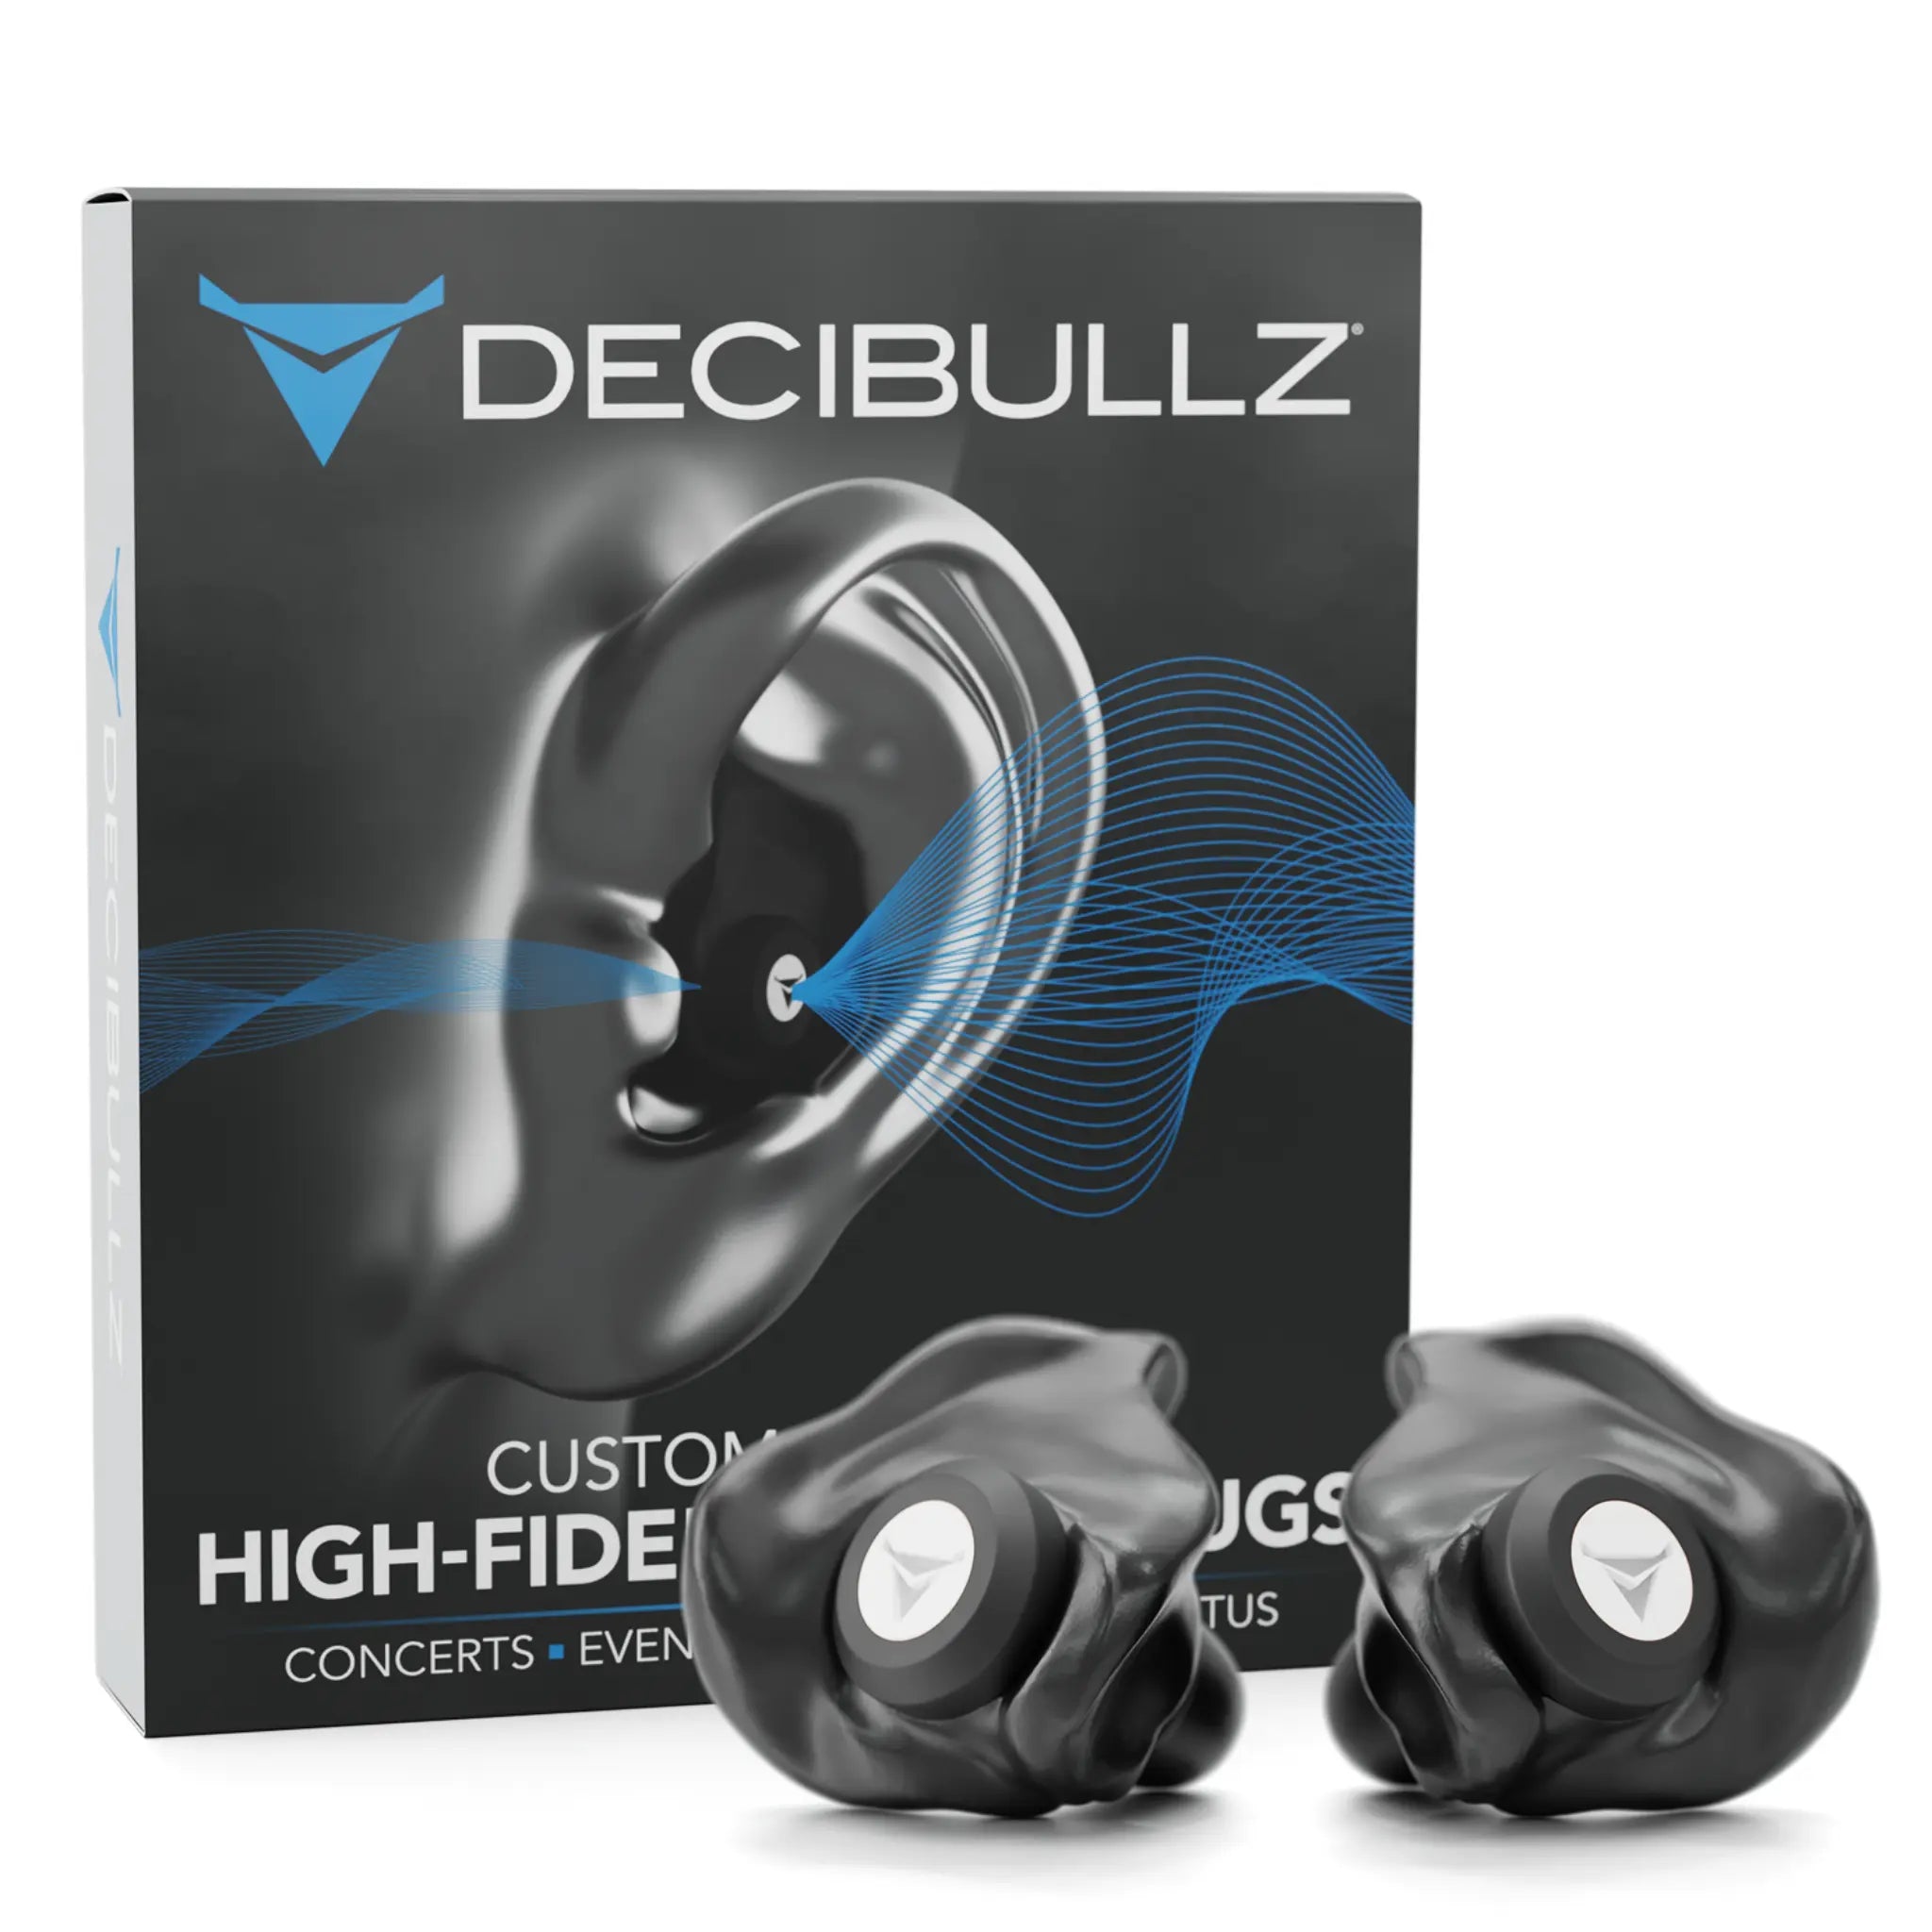 The image showcases a product box labeled "Custom Molded High-Fidelity Earplugs for Concerts, Musicians, Events, and Noise Sensitivity" with graphics of an ear and sound waves. In front are two black, custom molded earplugs featuring the Decibullz logo. The product is marketed for concerts, events, and tinnitus relief.